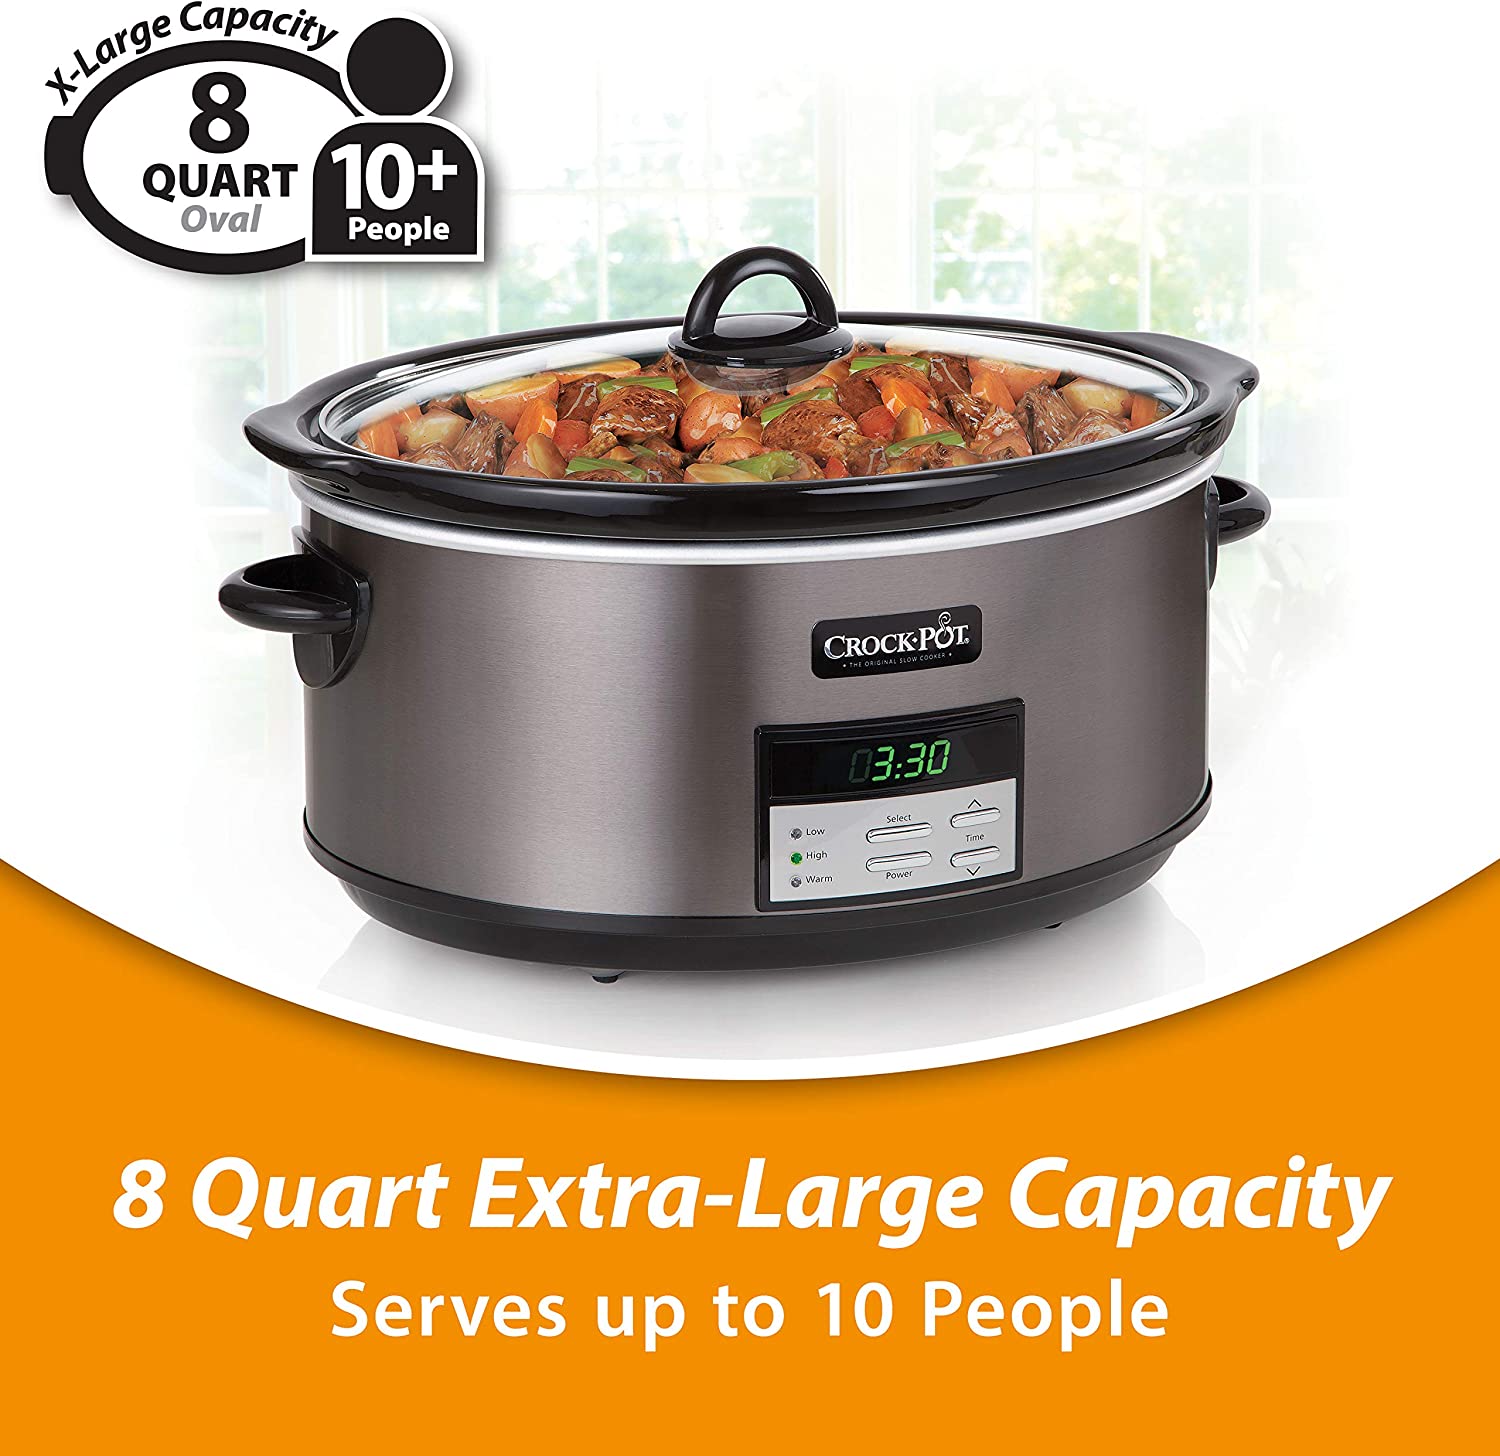 Crock-Pot 8 Quart Slow Cooker with Auto Warm Setting and Cookbook